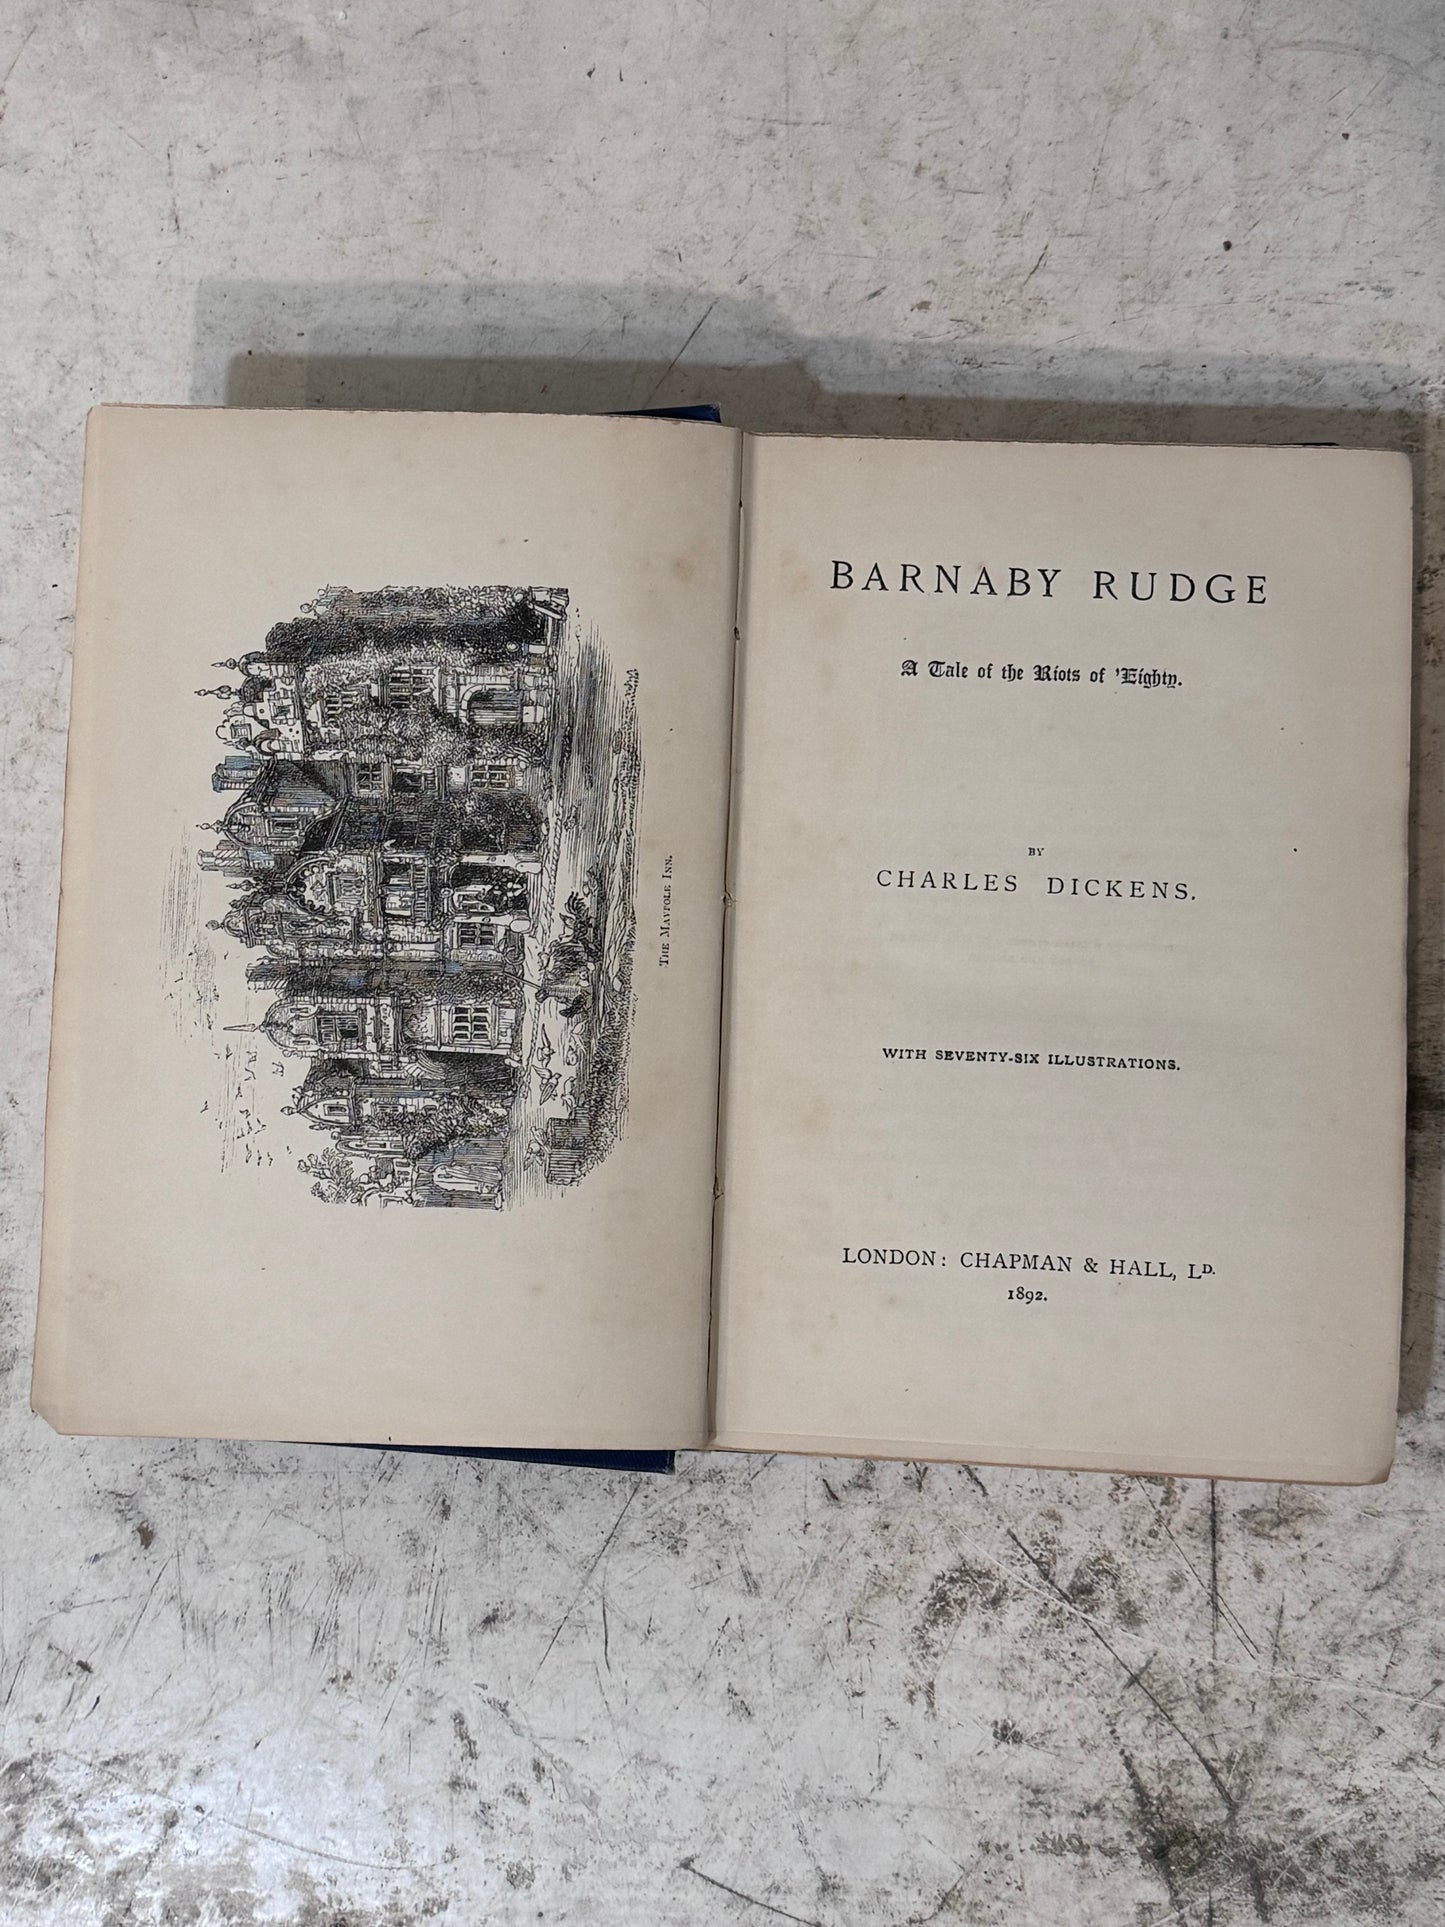 Barney Rudge by Charles Dickens 1892